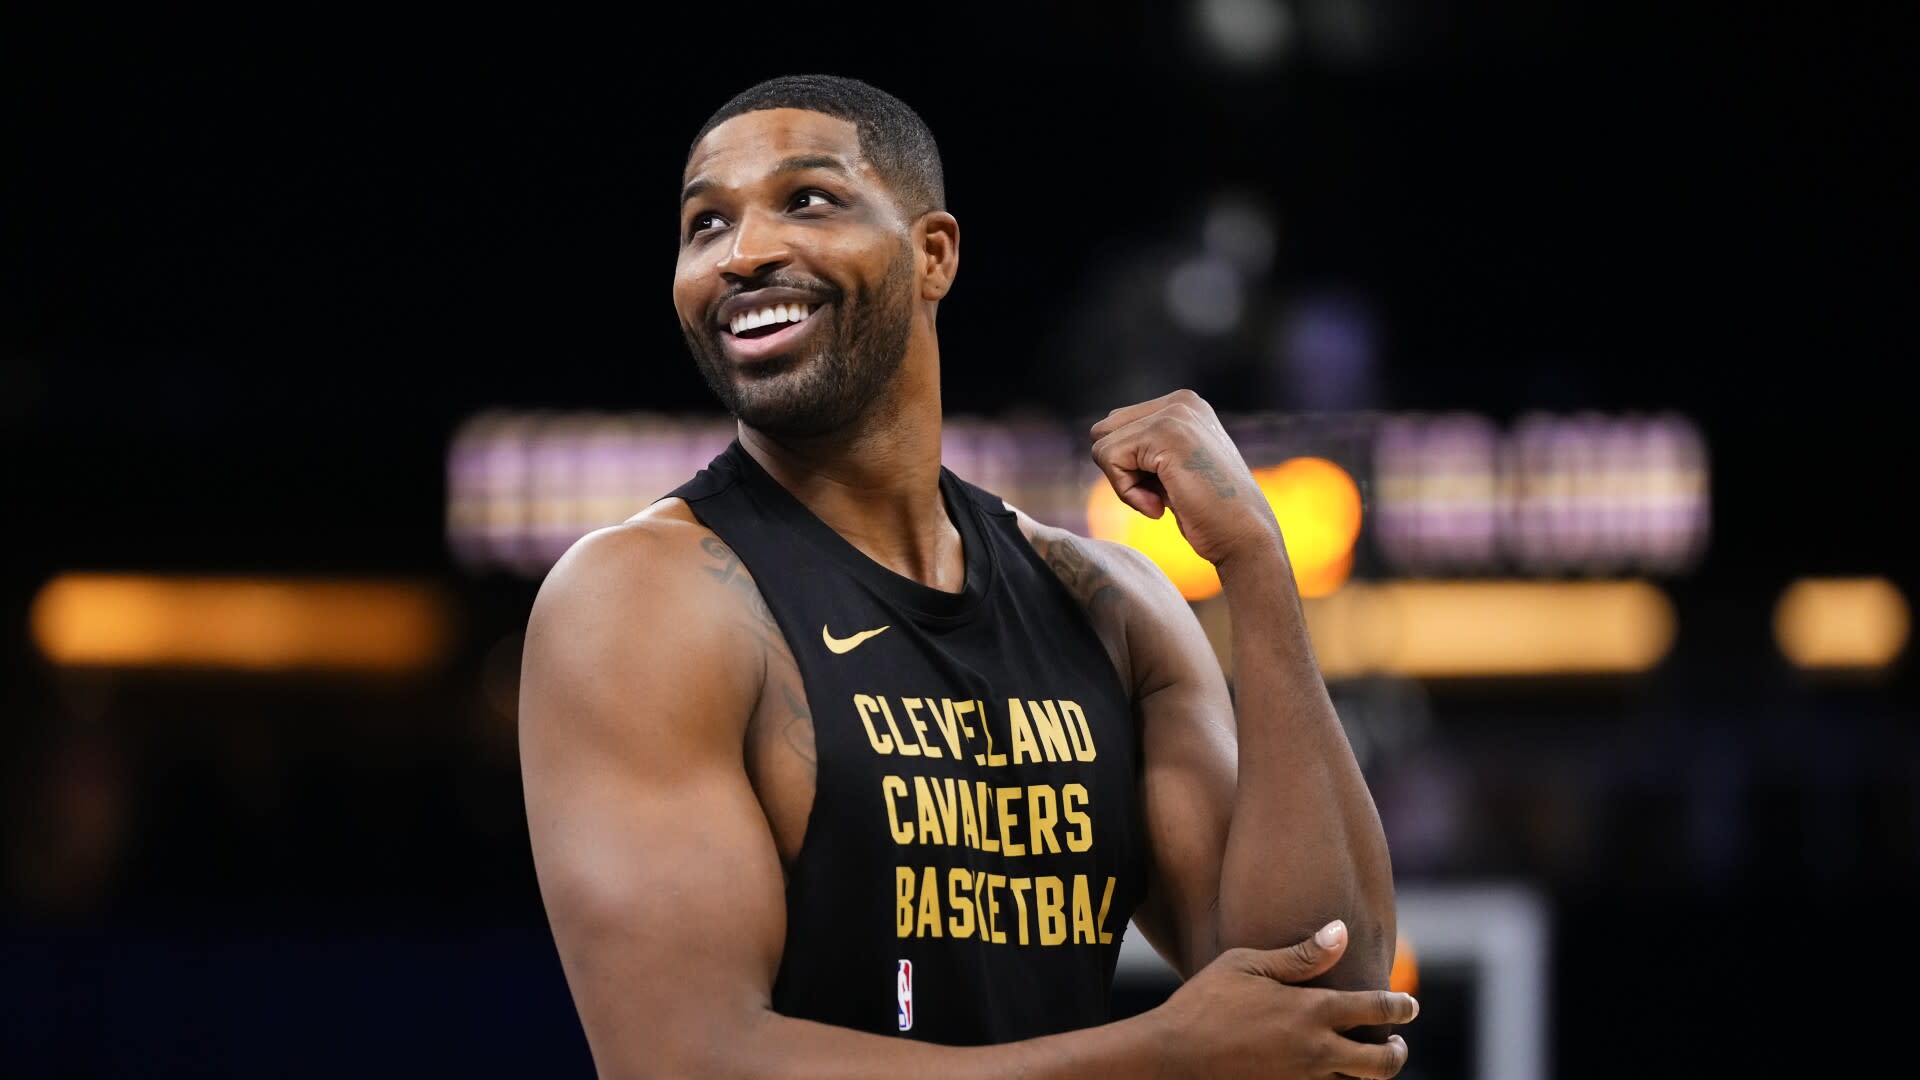 NBA suspends Cavaliers' Tristan Thompson 25 games for violating league’s anti-drug policy